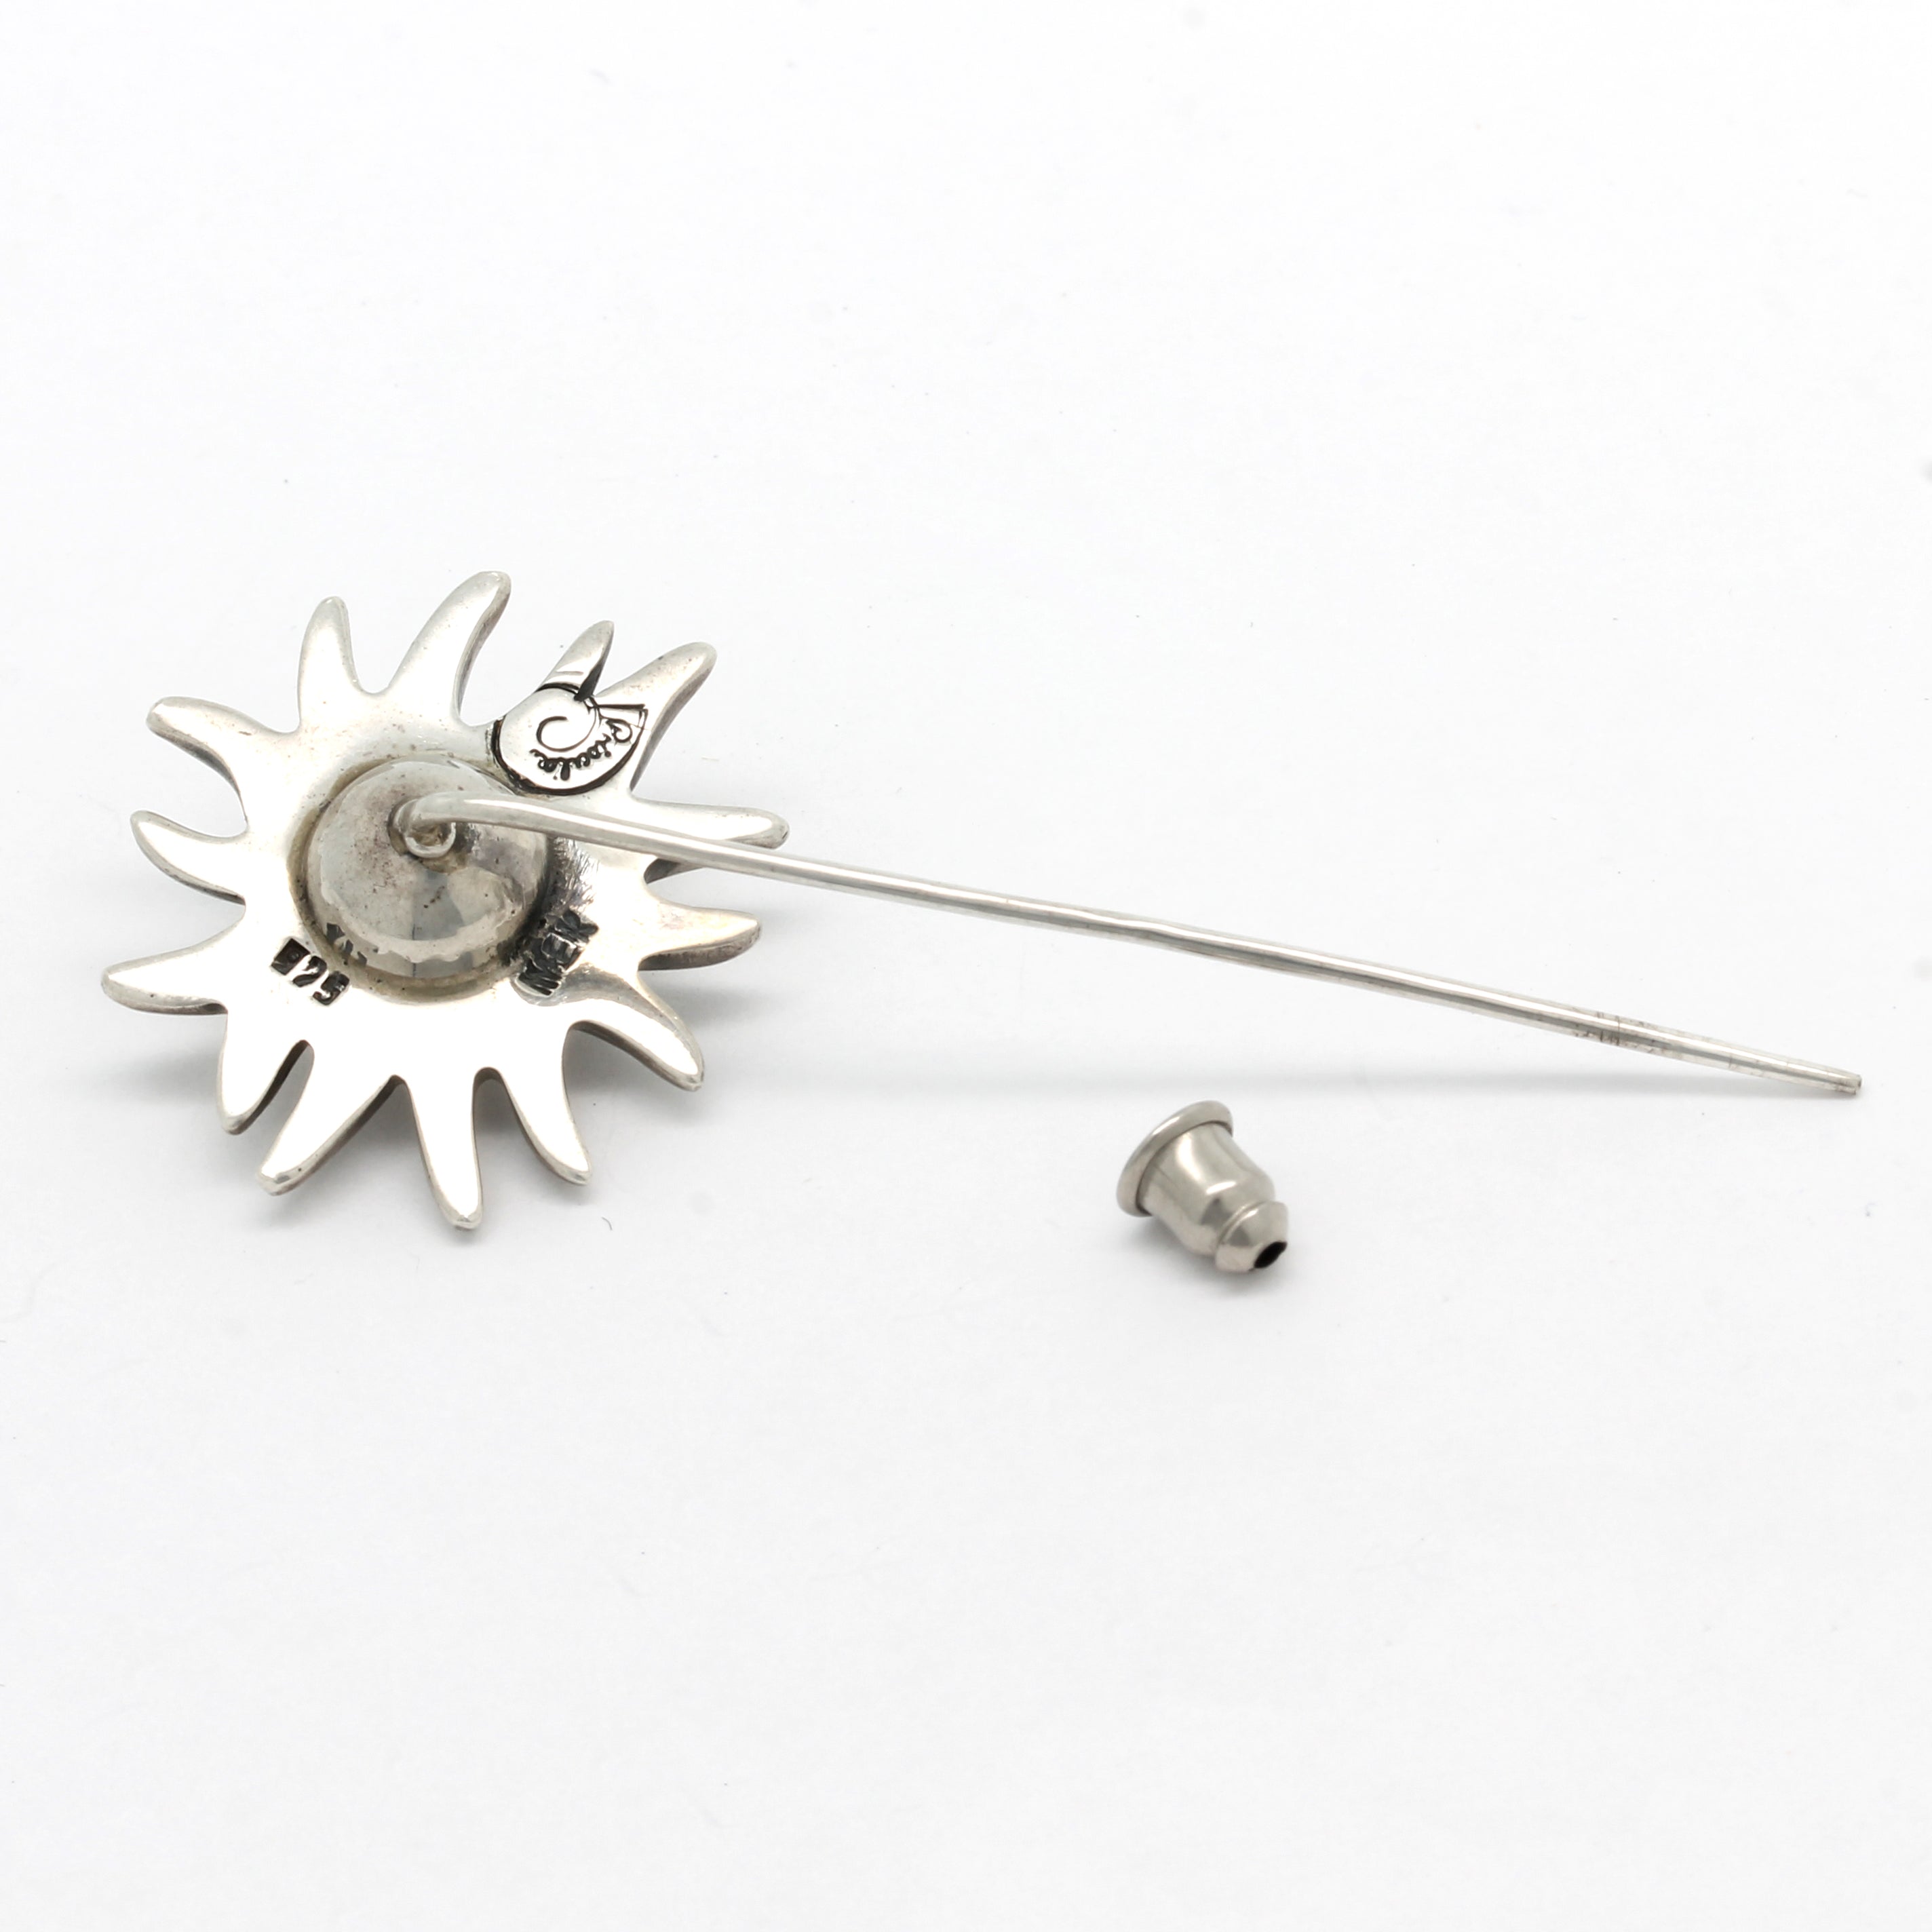 "Sea Flower" Tie-pin with a Sea of Cortez Pearl by Priscila Canales